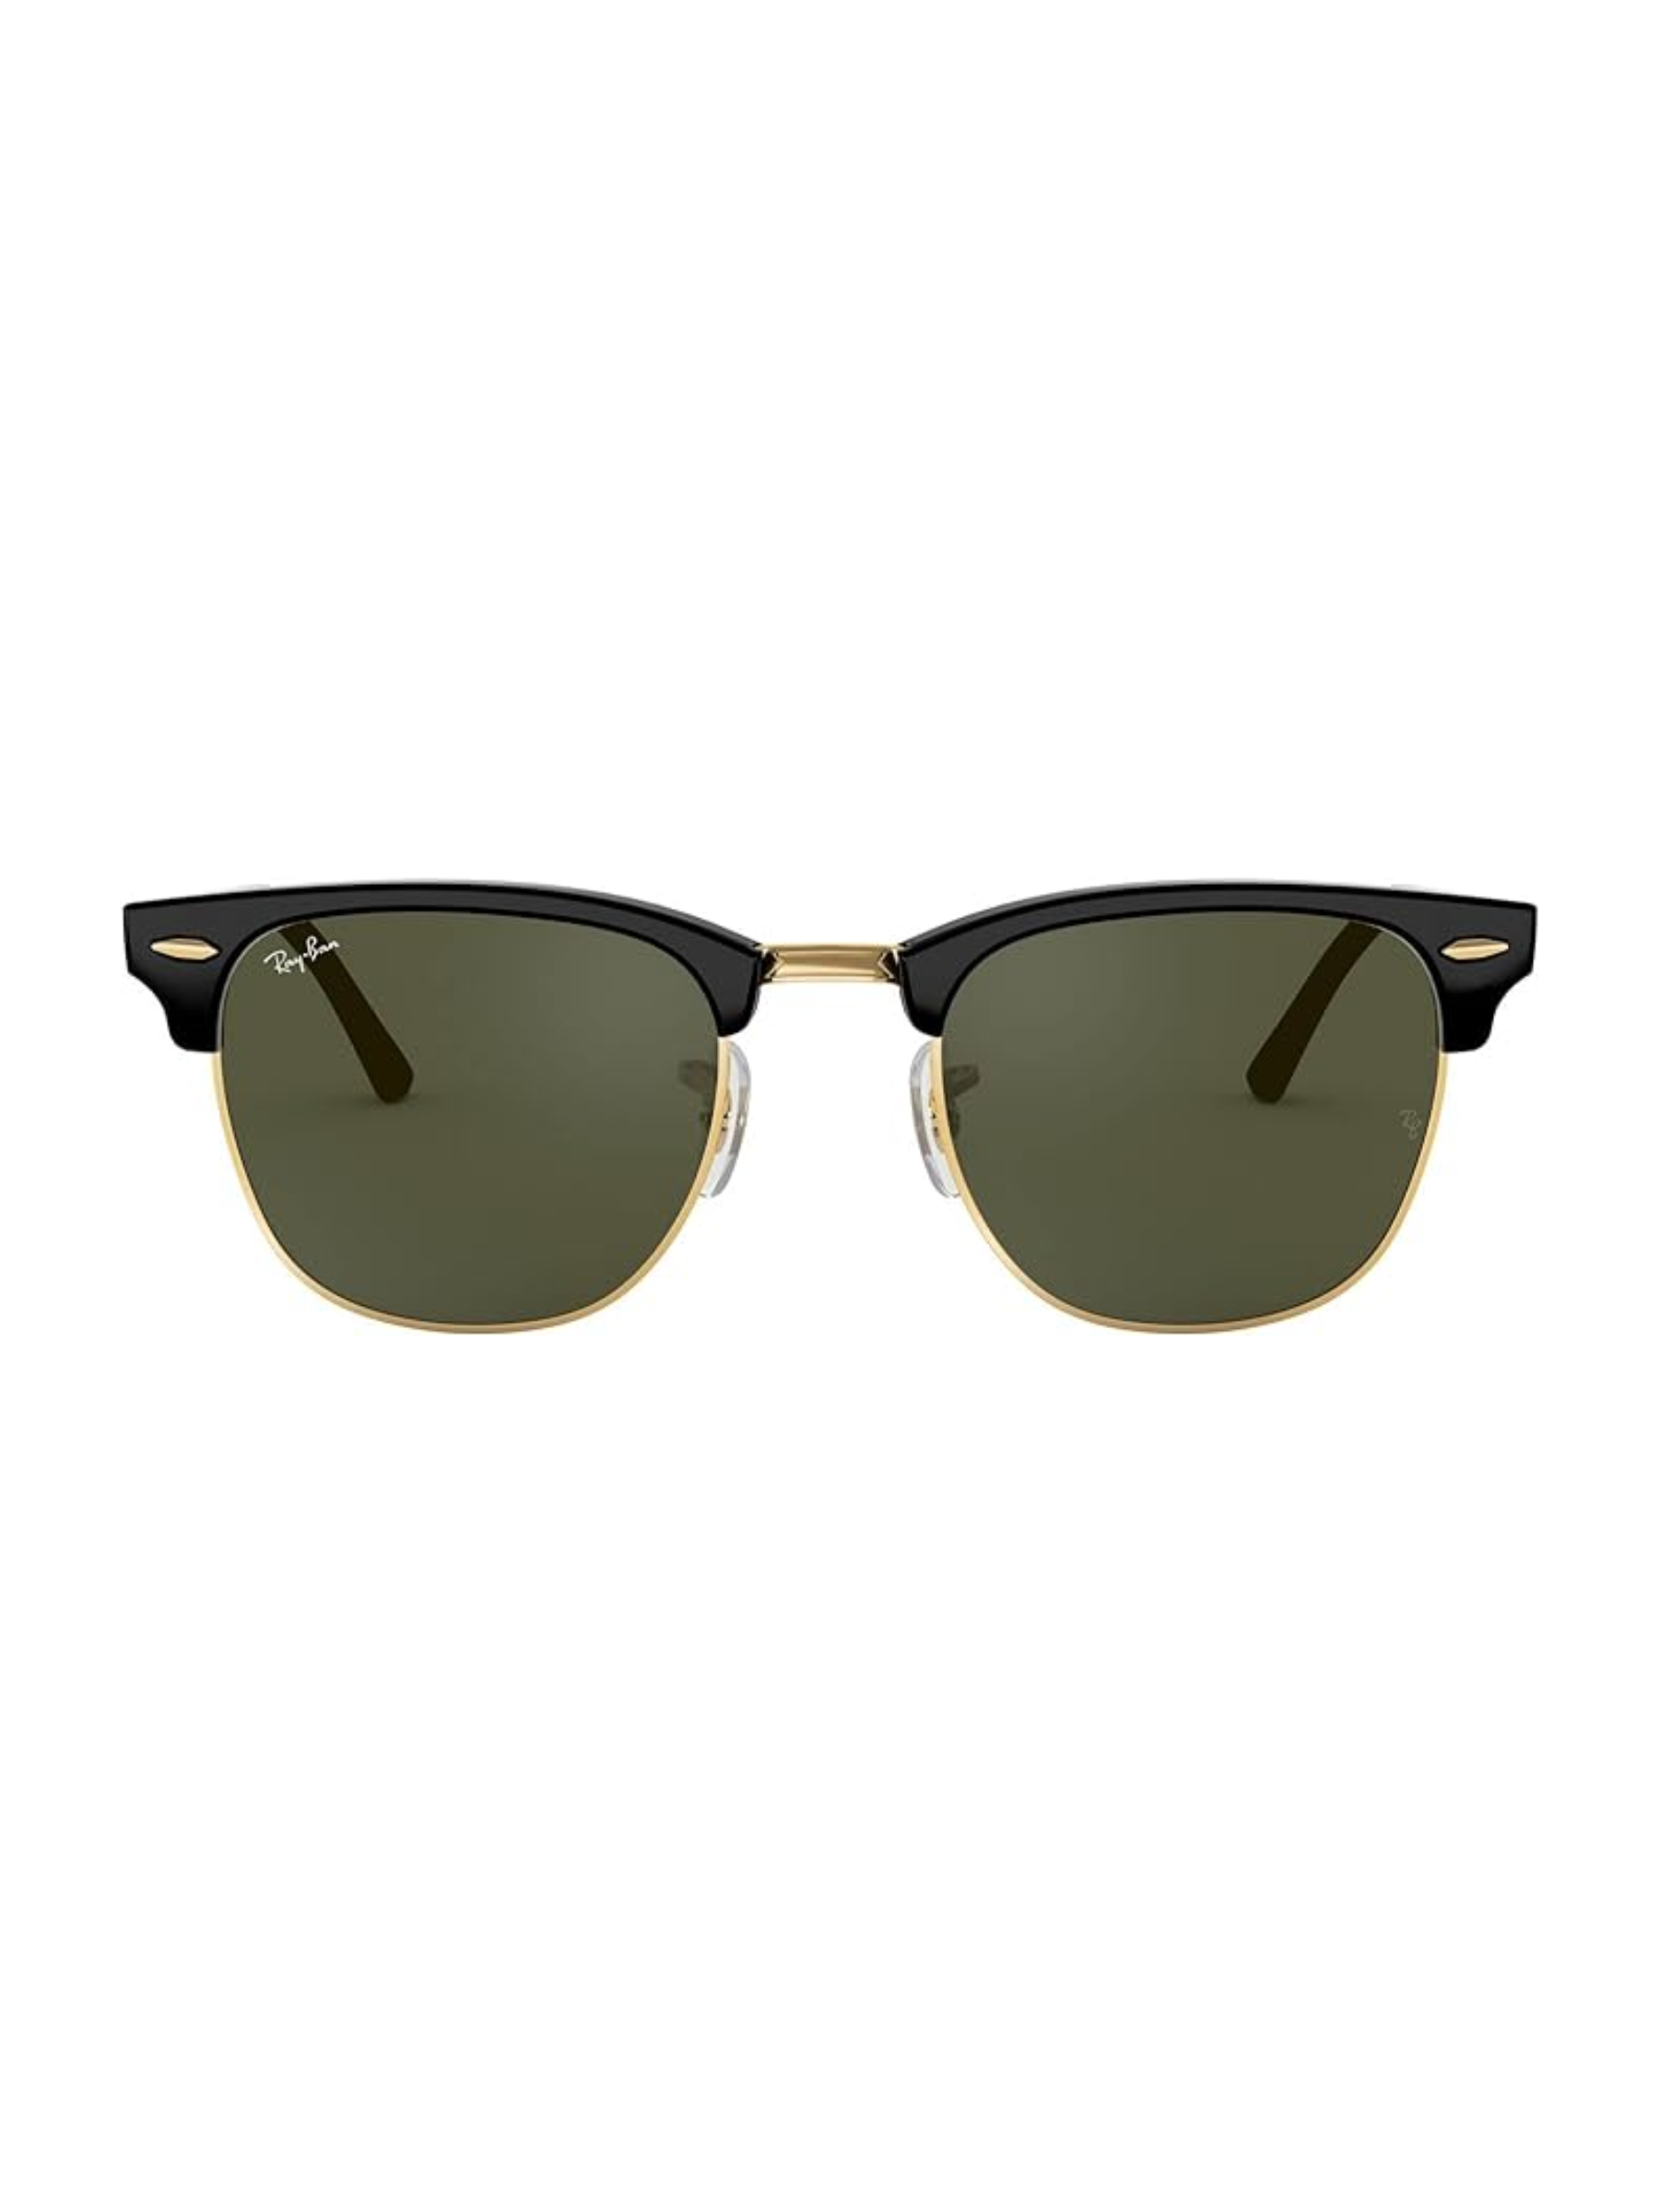 Ray-Ban’s classic Clubmaster silhouette looks good on a range of face shapes and comes in a bunch of frame colors and lens tints. $171, Amazon. <a href="https://www.amazon.com/dp/B002Q5NC8Y?">Get it now!</a><p>Sign up for today’s biggest stories, from pop culture to politics.</p><a href="https://www.glamour.com/newsletter/news?sourceCode=msnsend">Sign Up</a>